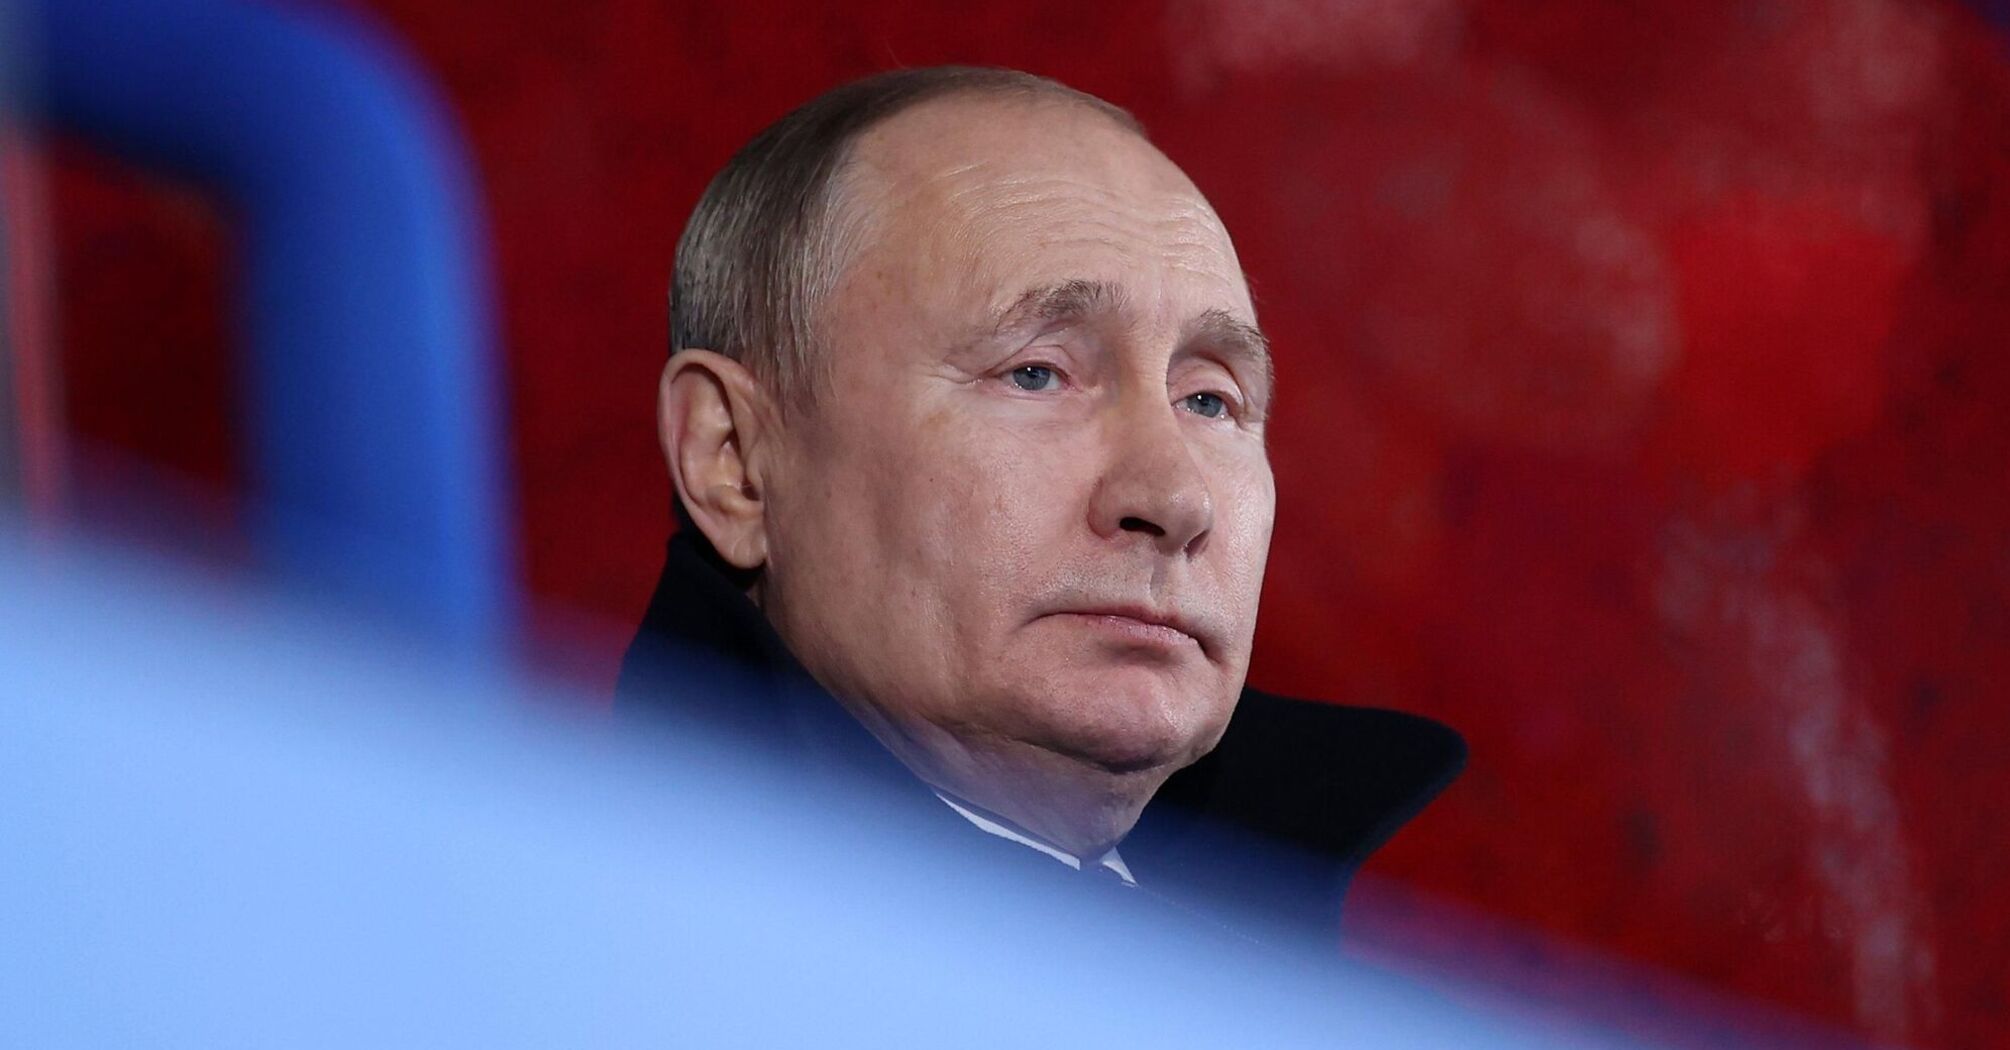 Putin issues cynical statement on talks with Ukraine and talks about 'security guarantees'